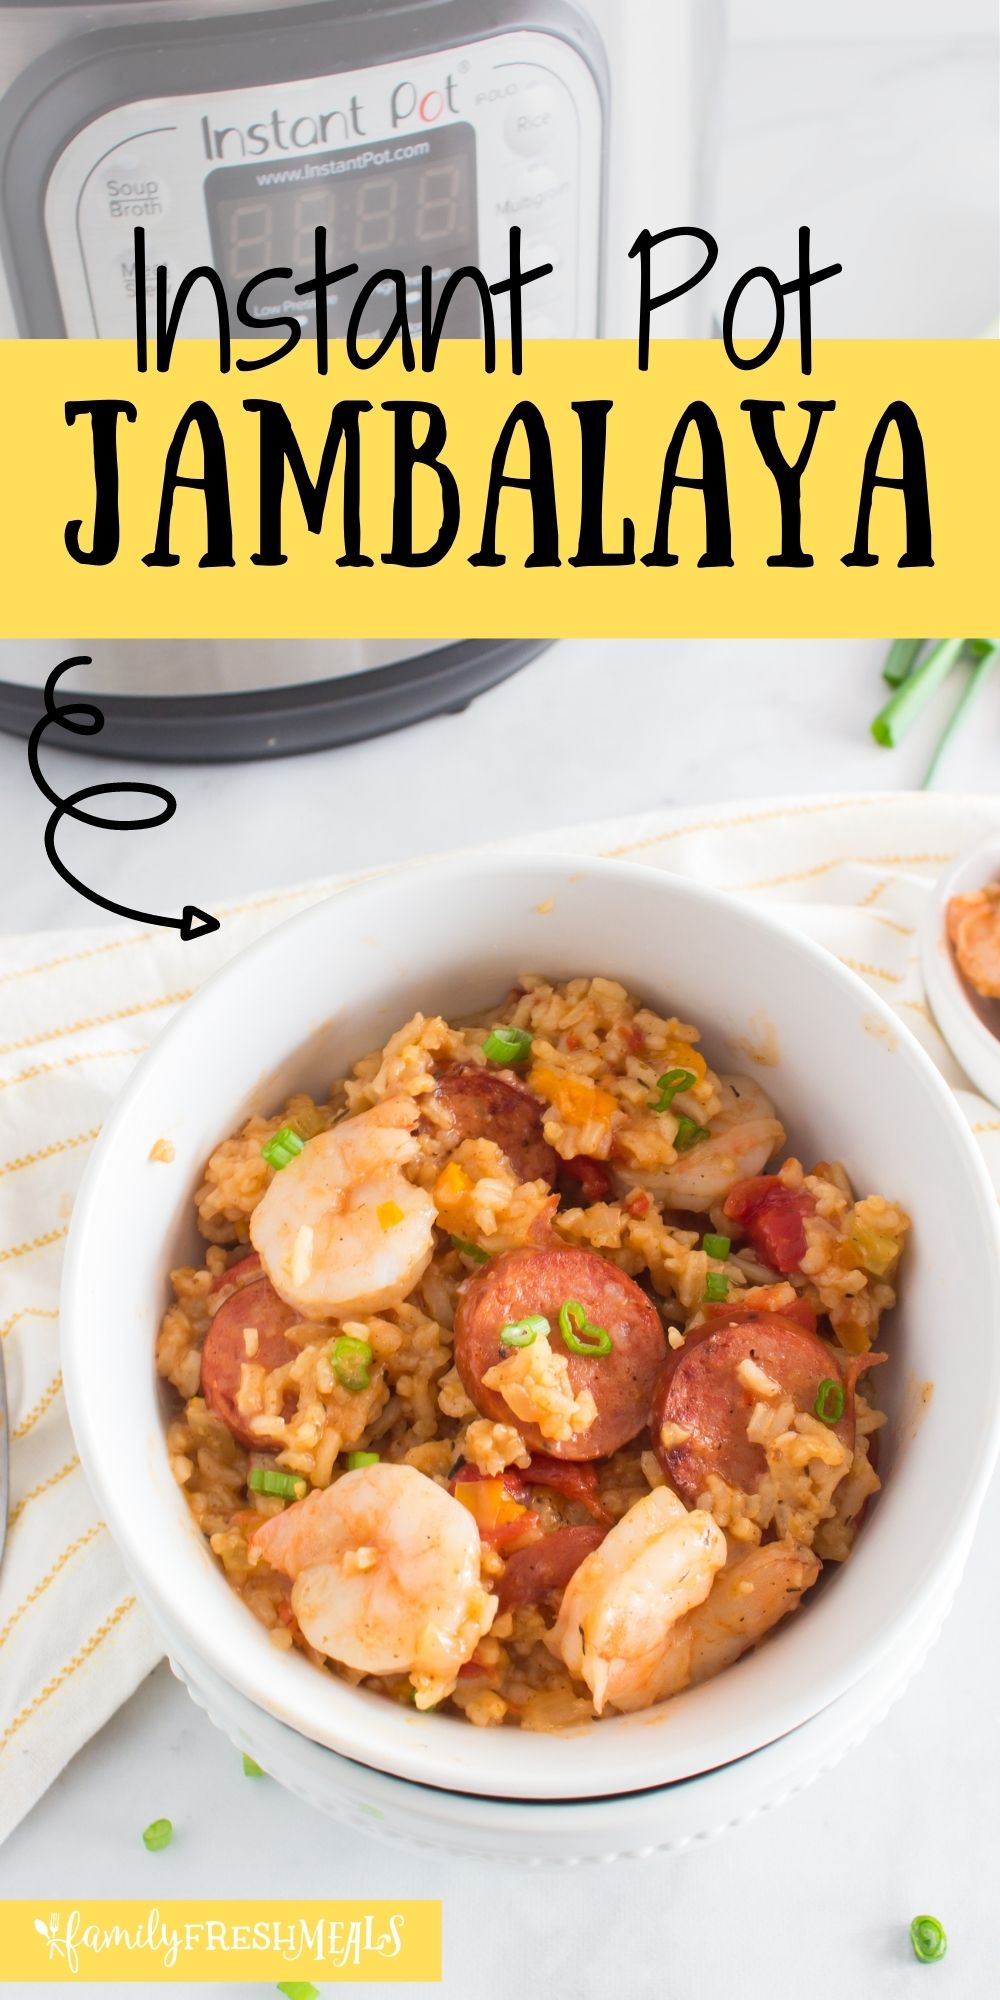 Who's in the mood for some Cajun cooking? This Instant Pot Jambalaya is a classic Louisiana stew that's easy in your kitchen! via @familyfresh